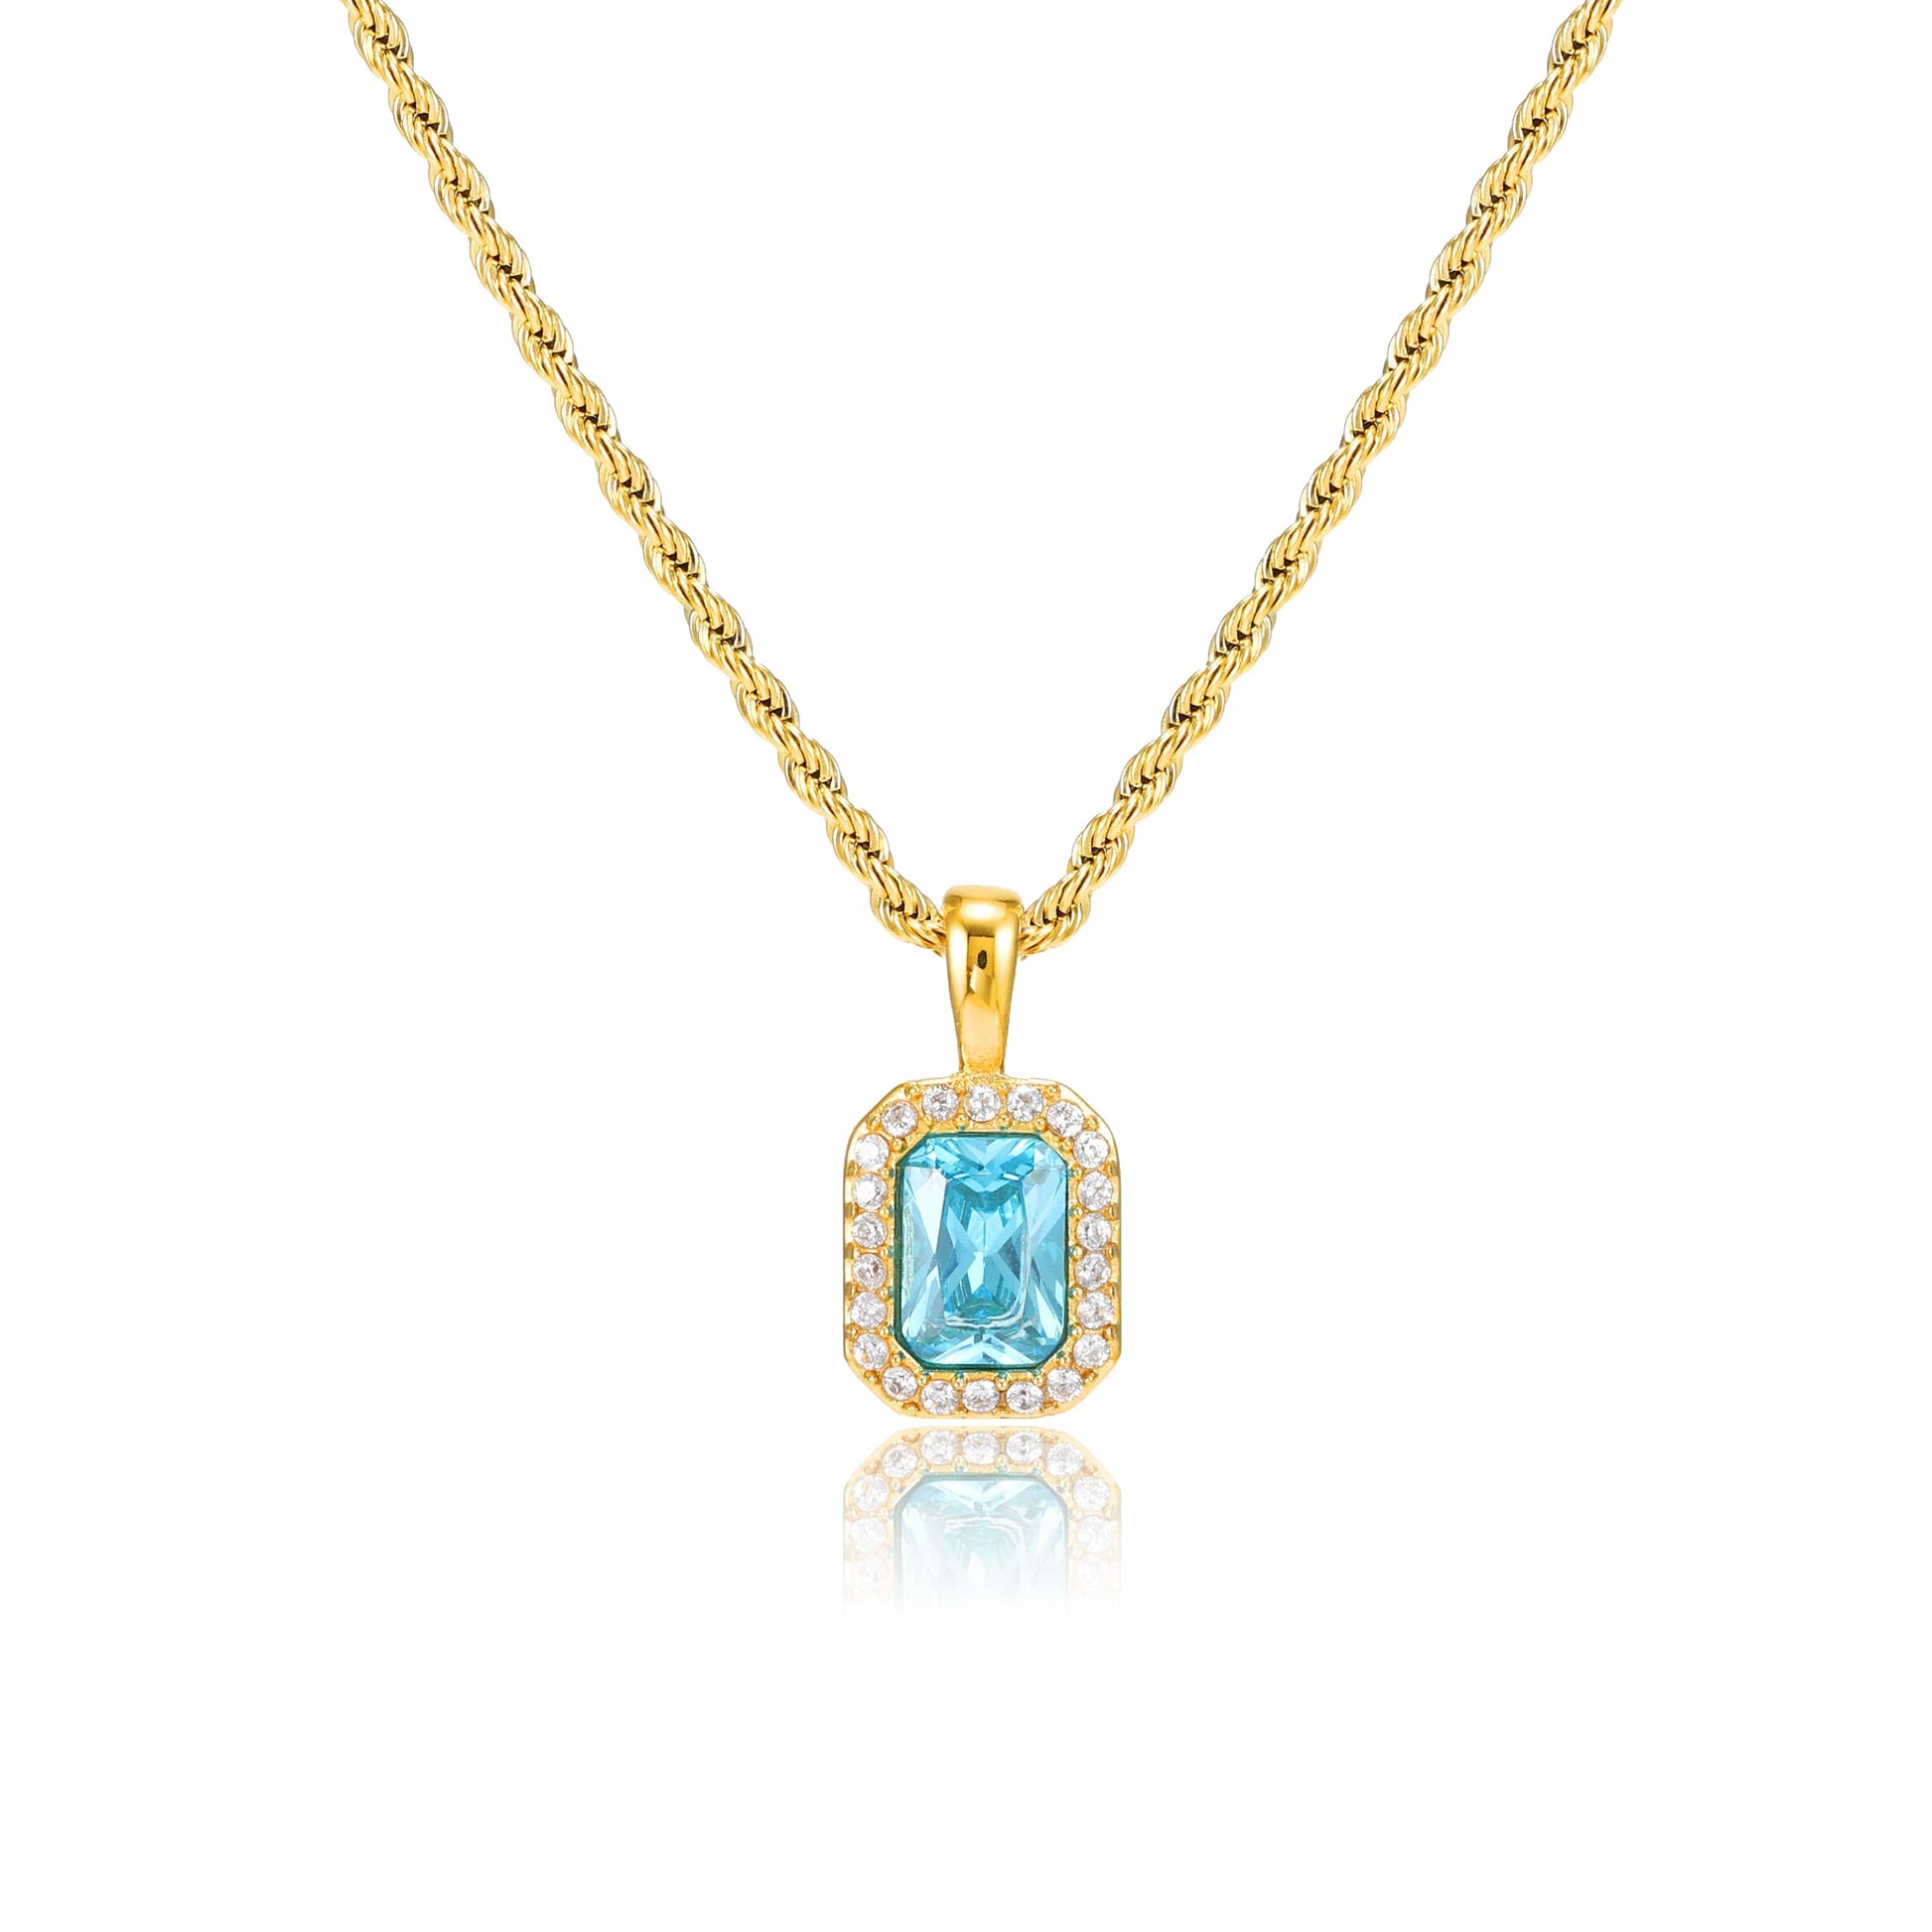 bianco rosso Necklaces Gold Aqua Gem Necklace cyprus greece jewelry gift free shipping europe worldwide